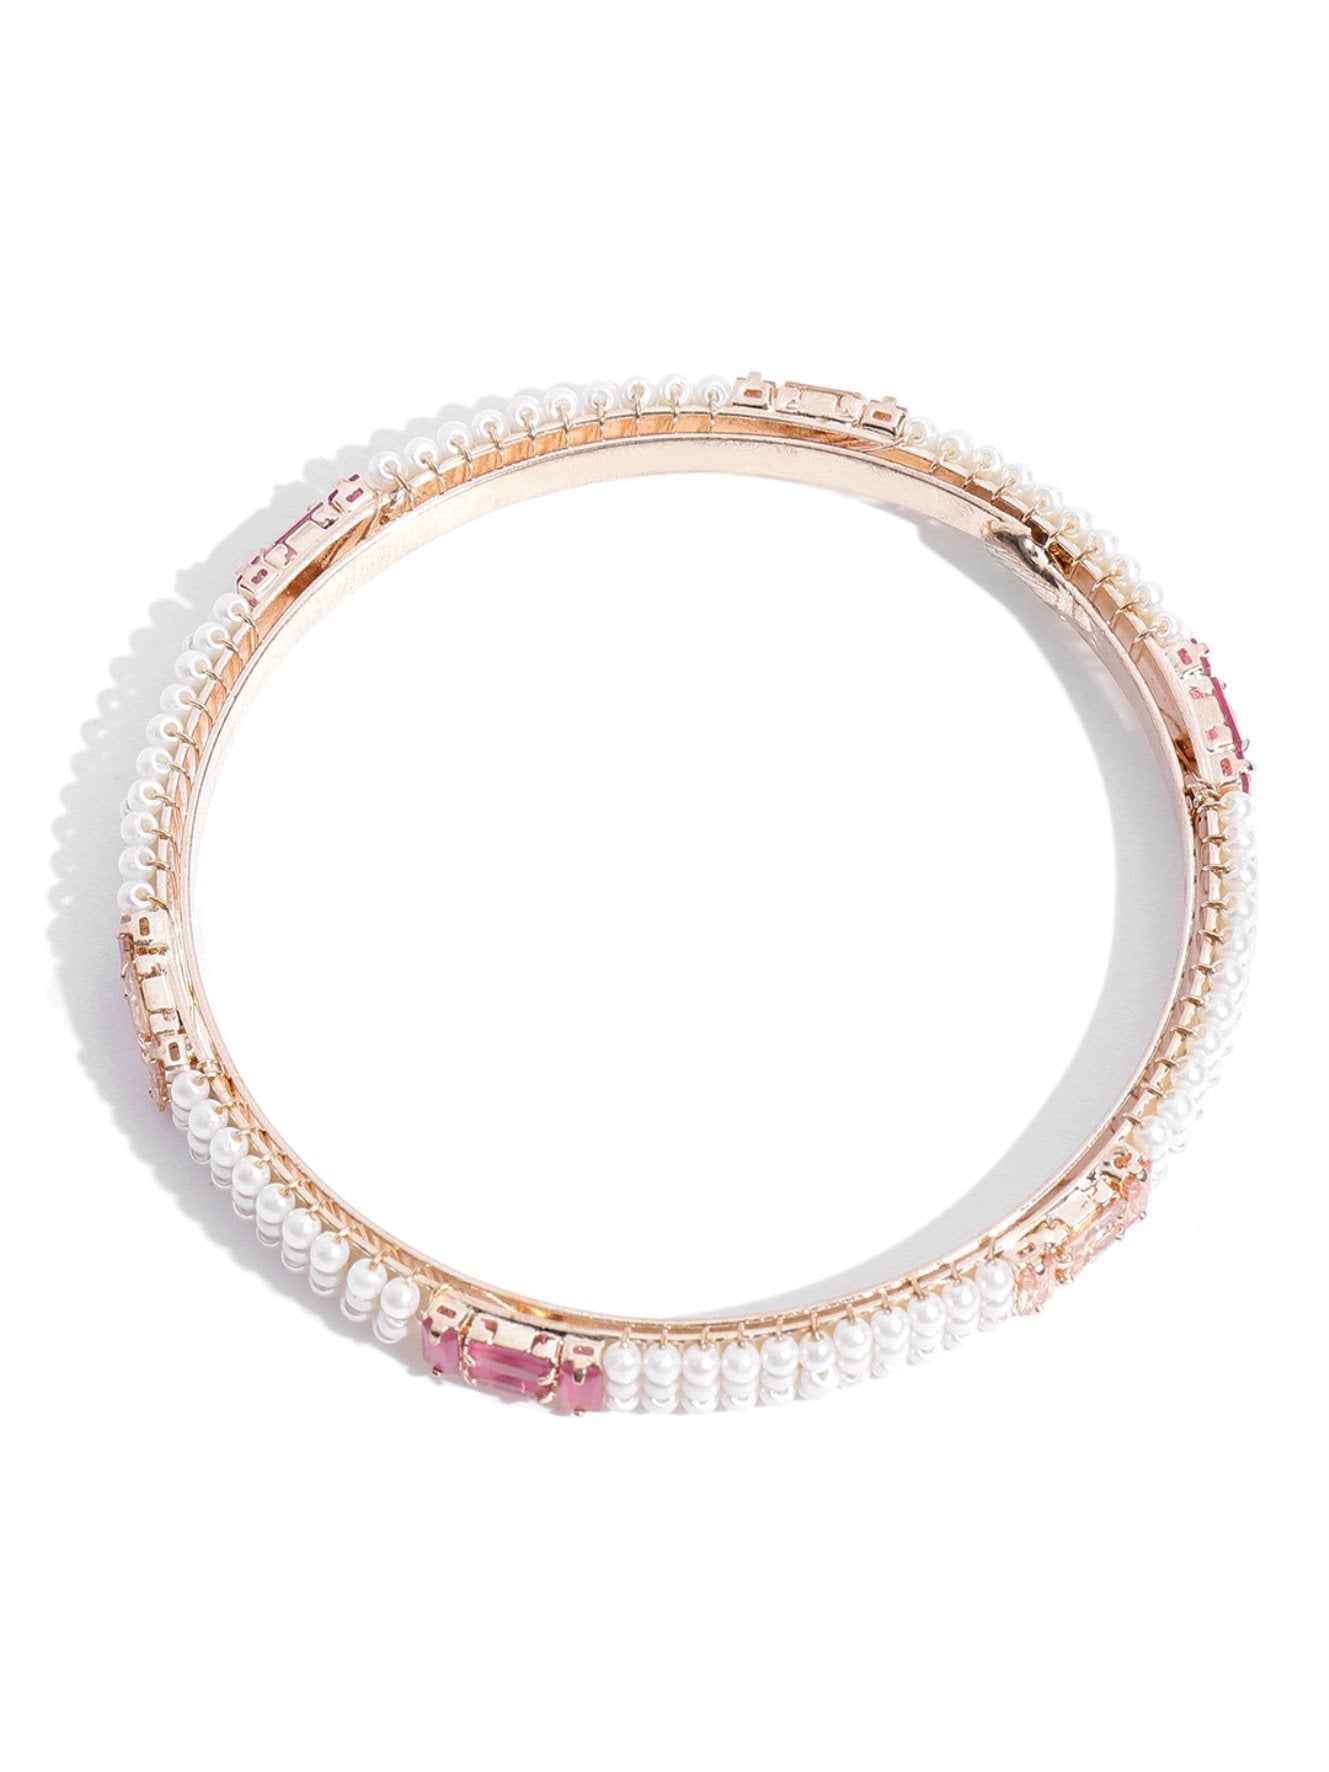 Women's Set Of 2 Gold-Plated Pearls and Stones Studded Bangles in Pink and White Color - Priyaasi